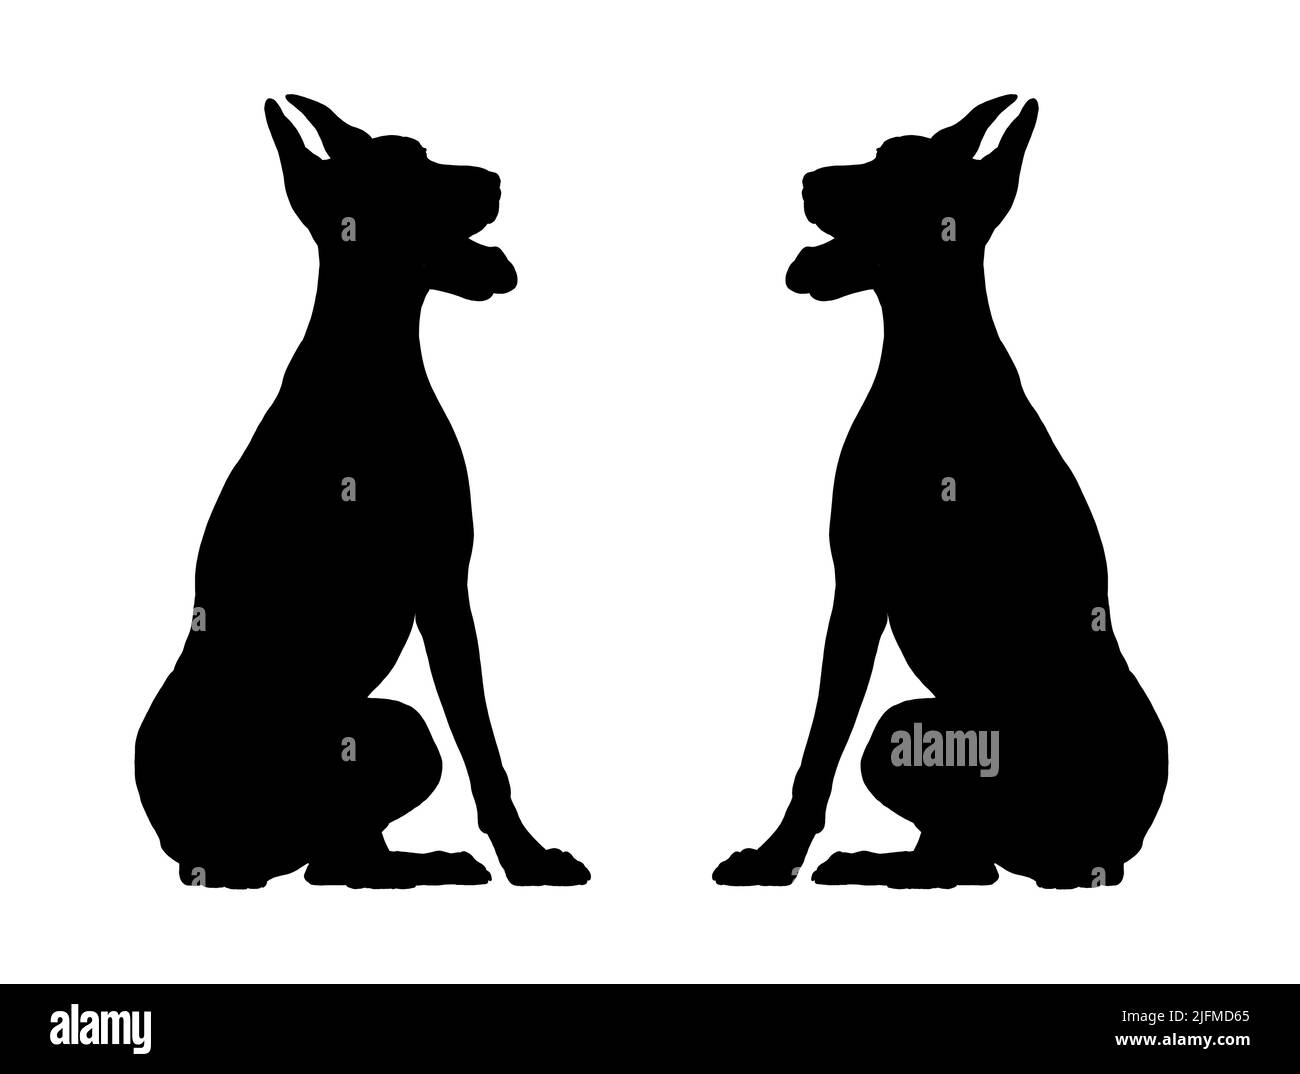 Silhouette of dobermann. Isolated illustration with the elegant dog. Black doberman pinscher drawing. Stock Photo